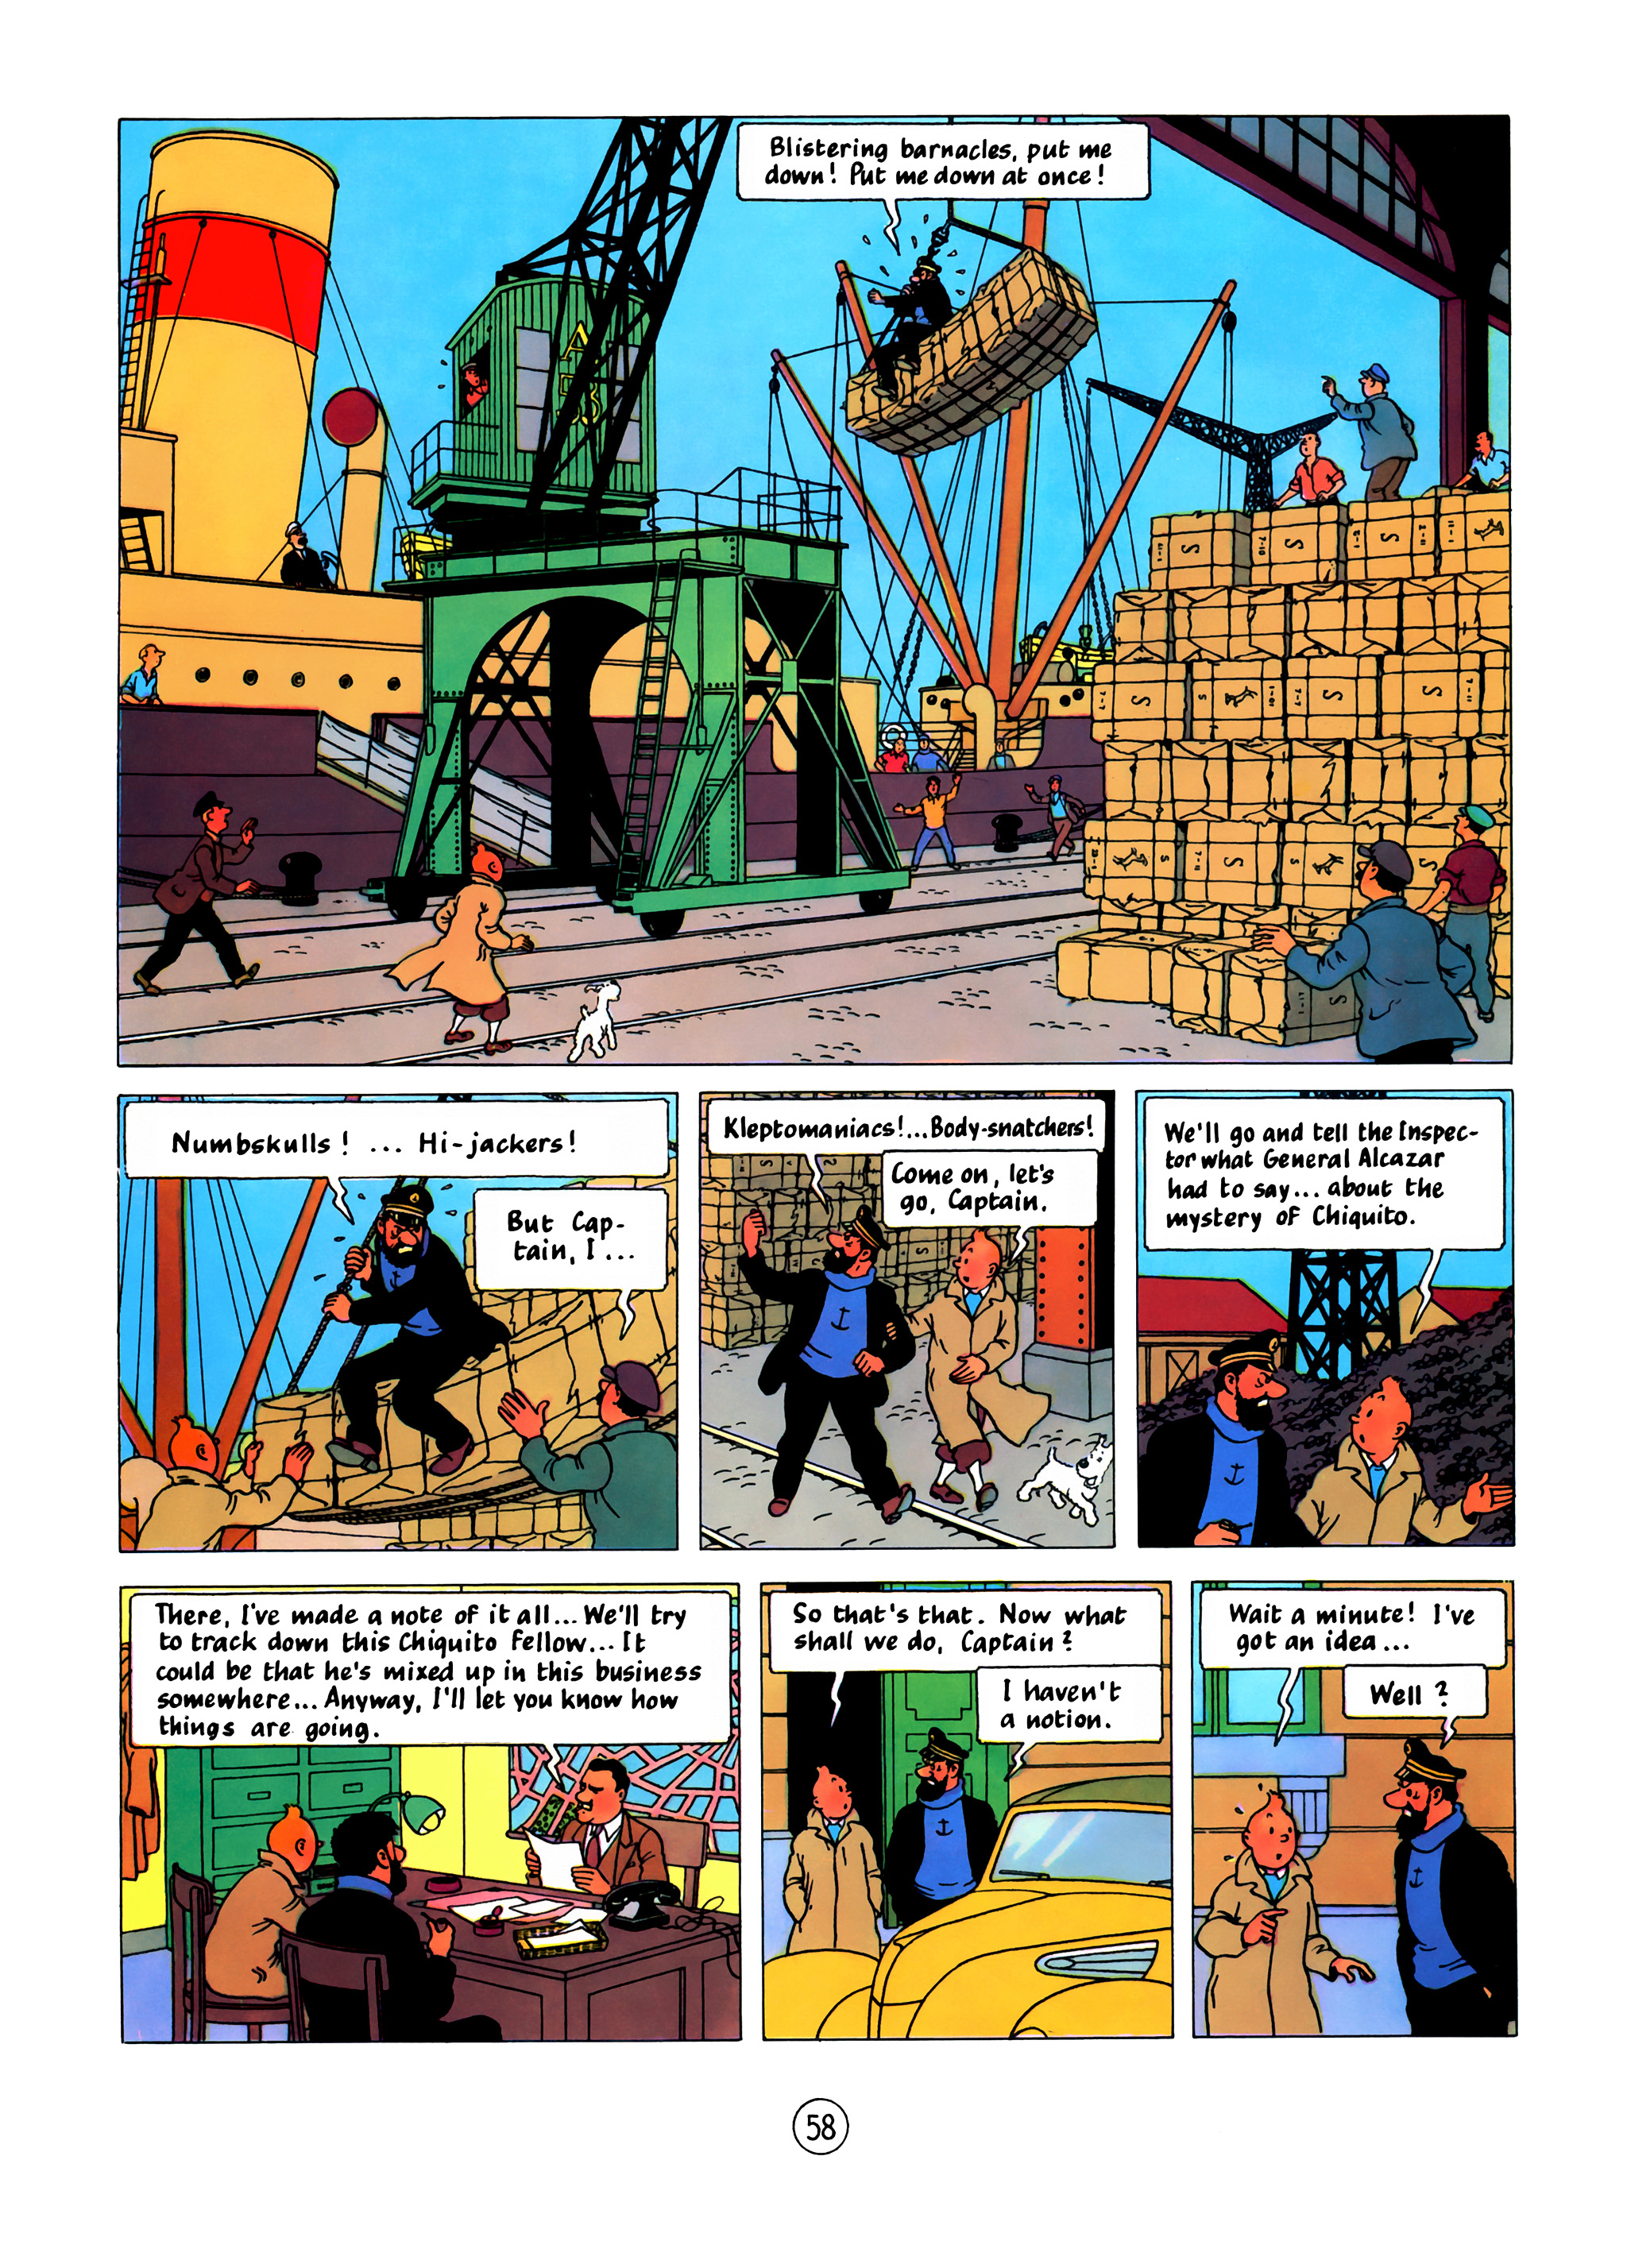 The Adventures of Tintin 013 | Read All Comics Online